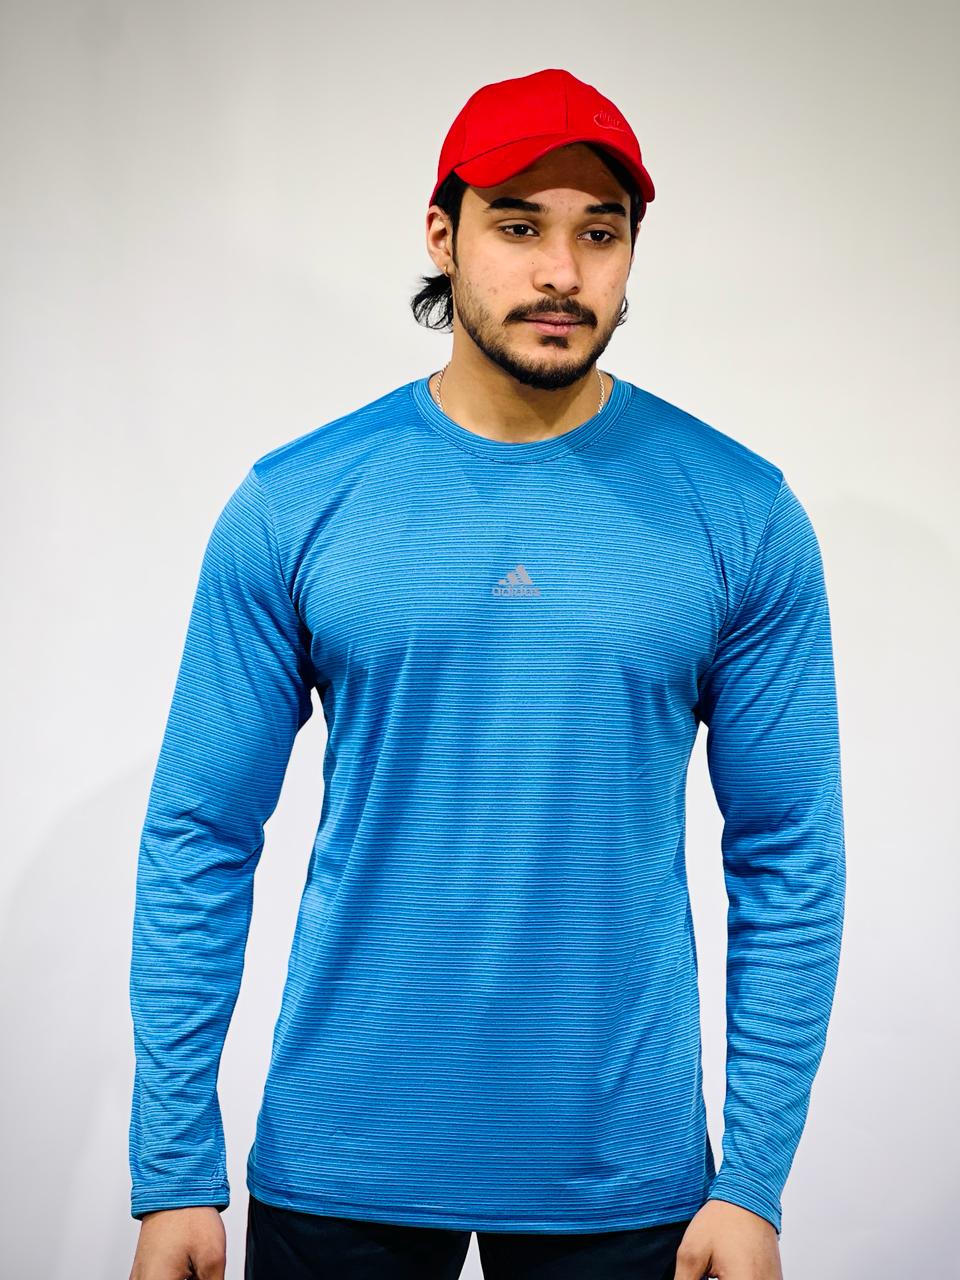 Adidas-Over size Full Sleeve Shirt In Dri-fit Stuff.